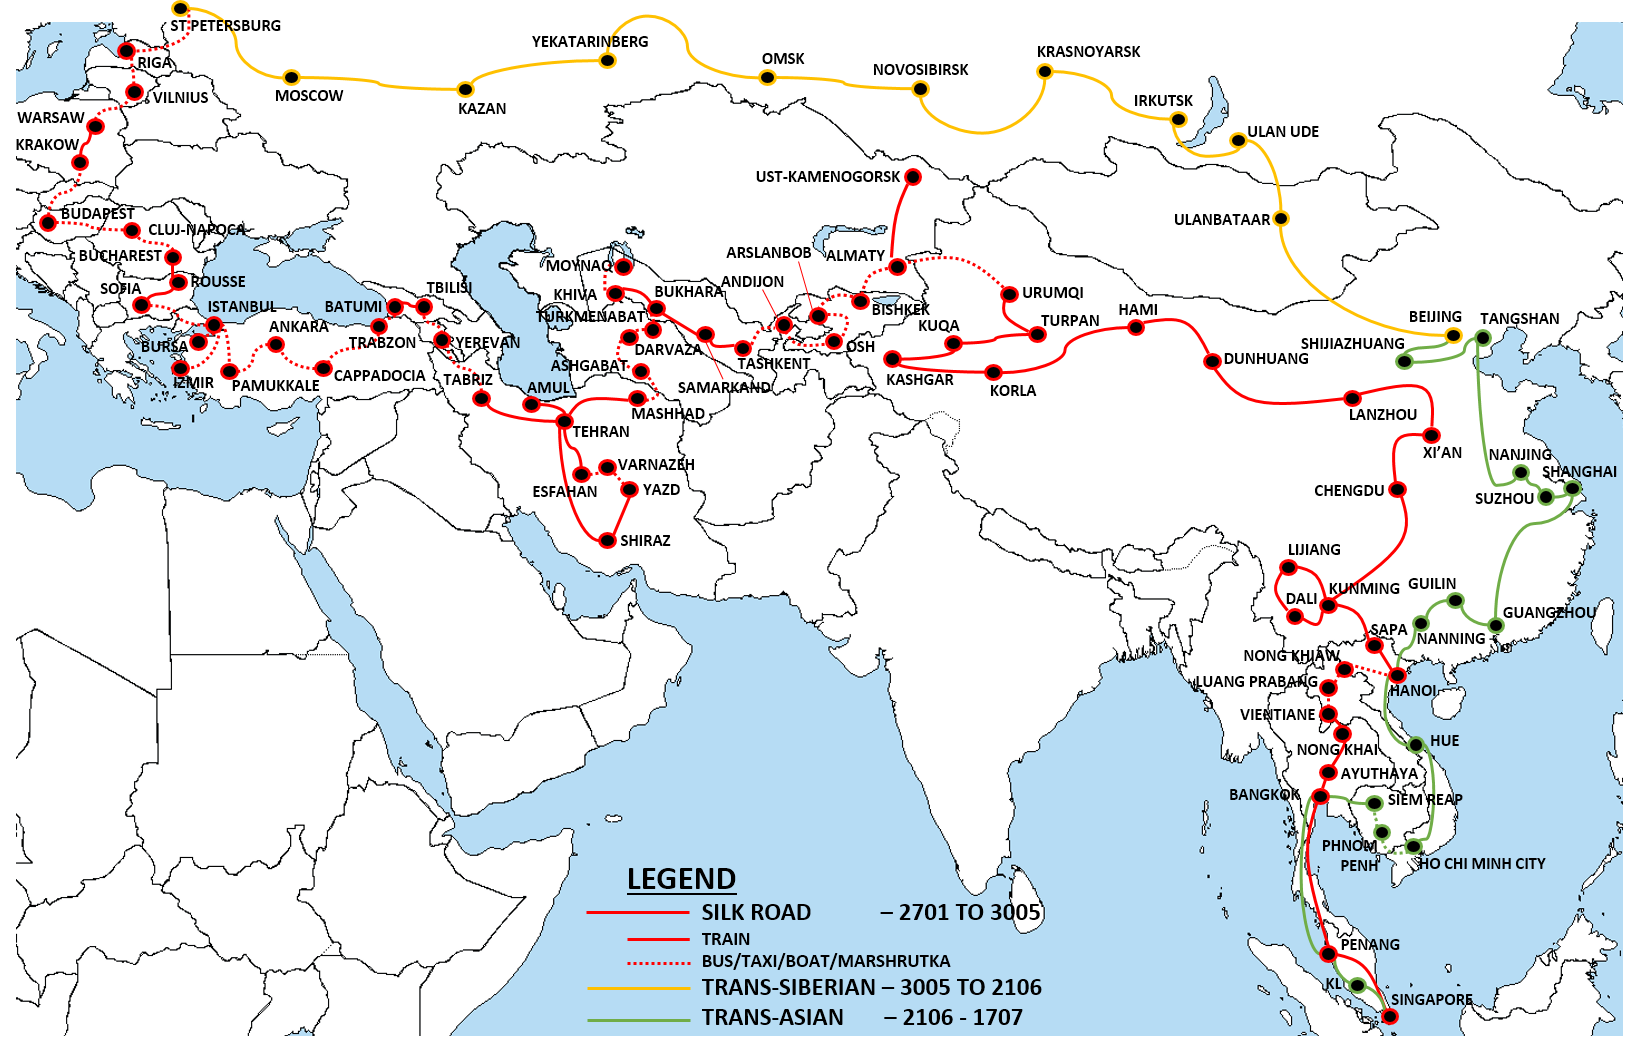 exercise-silk-road-map3.png